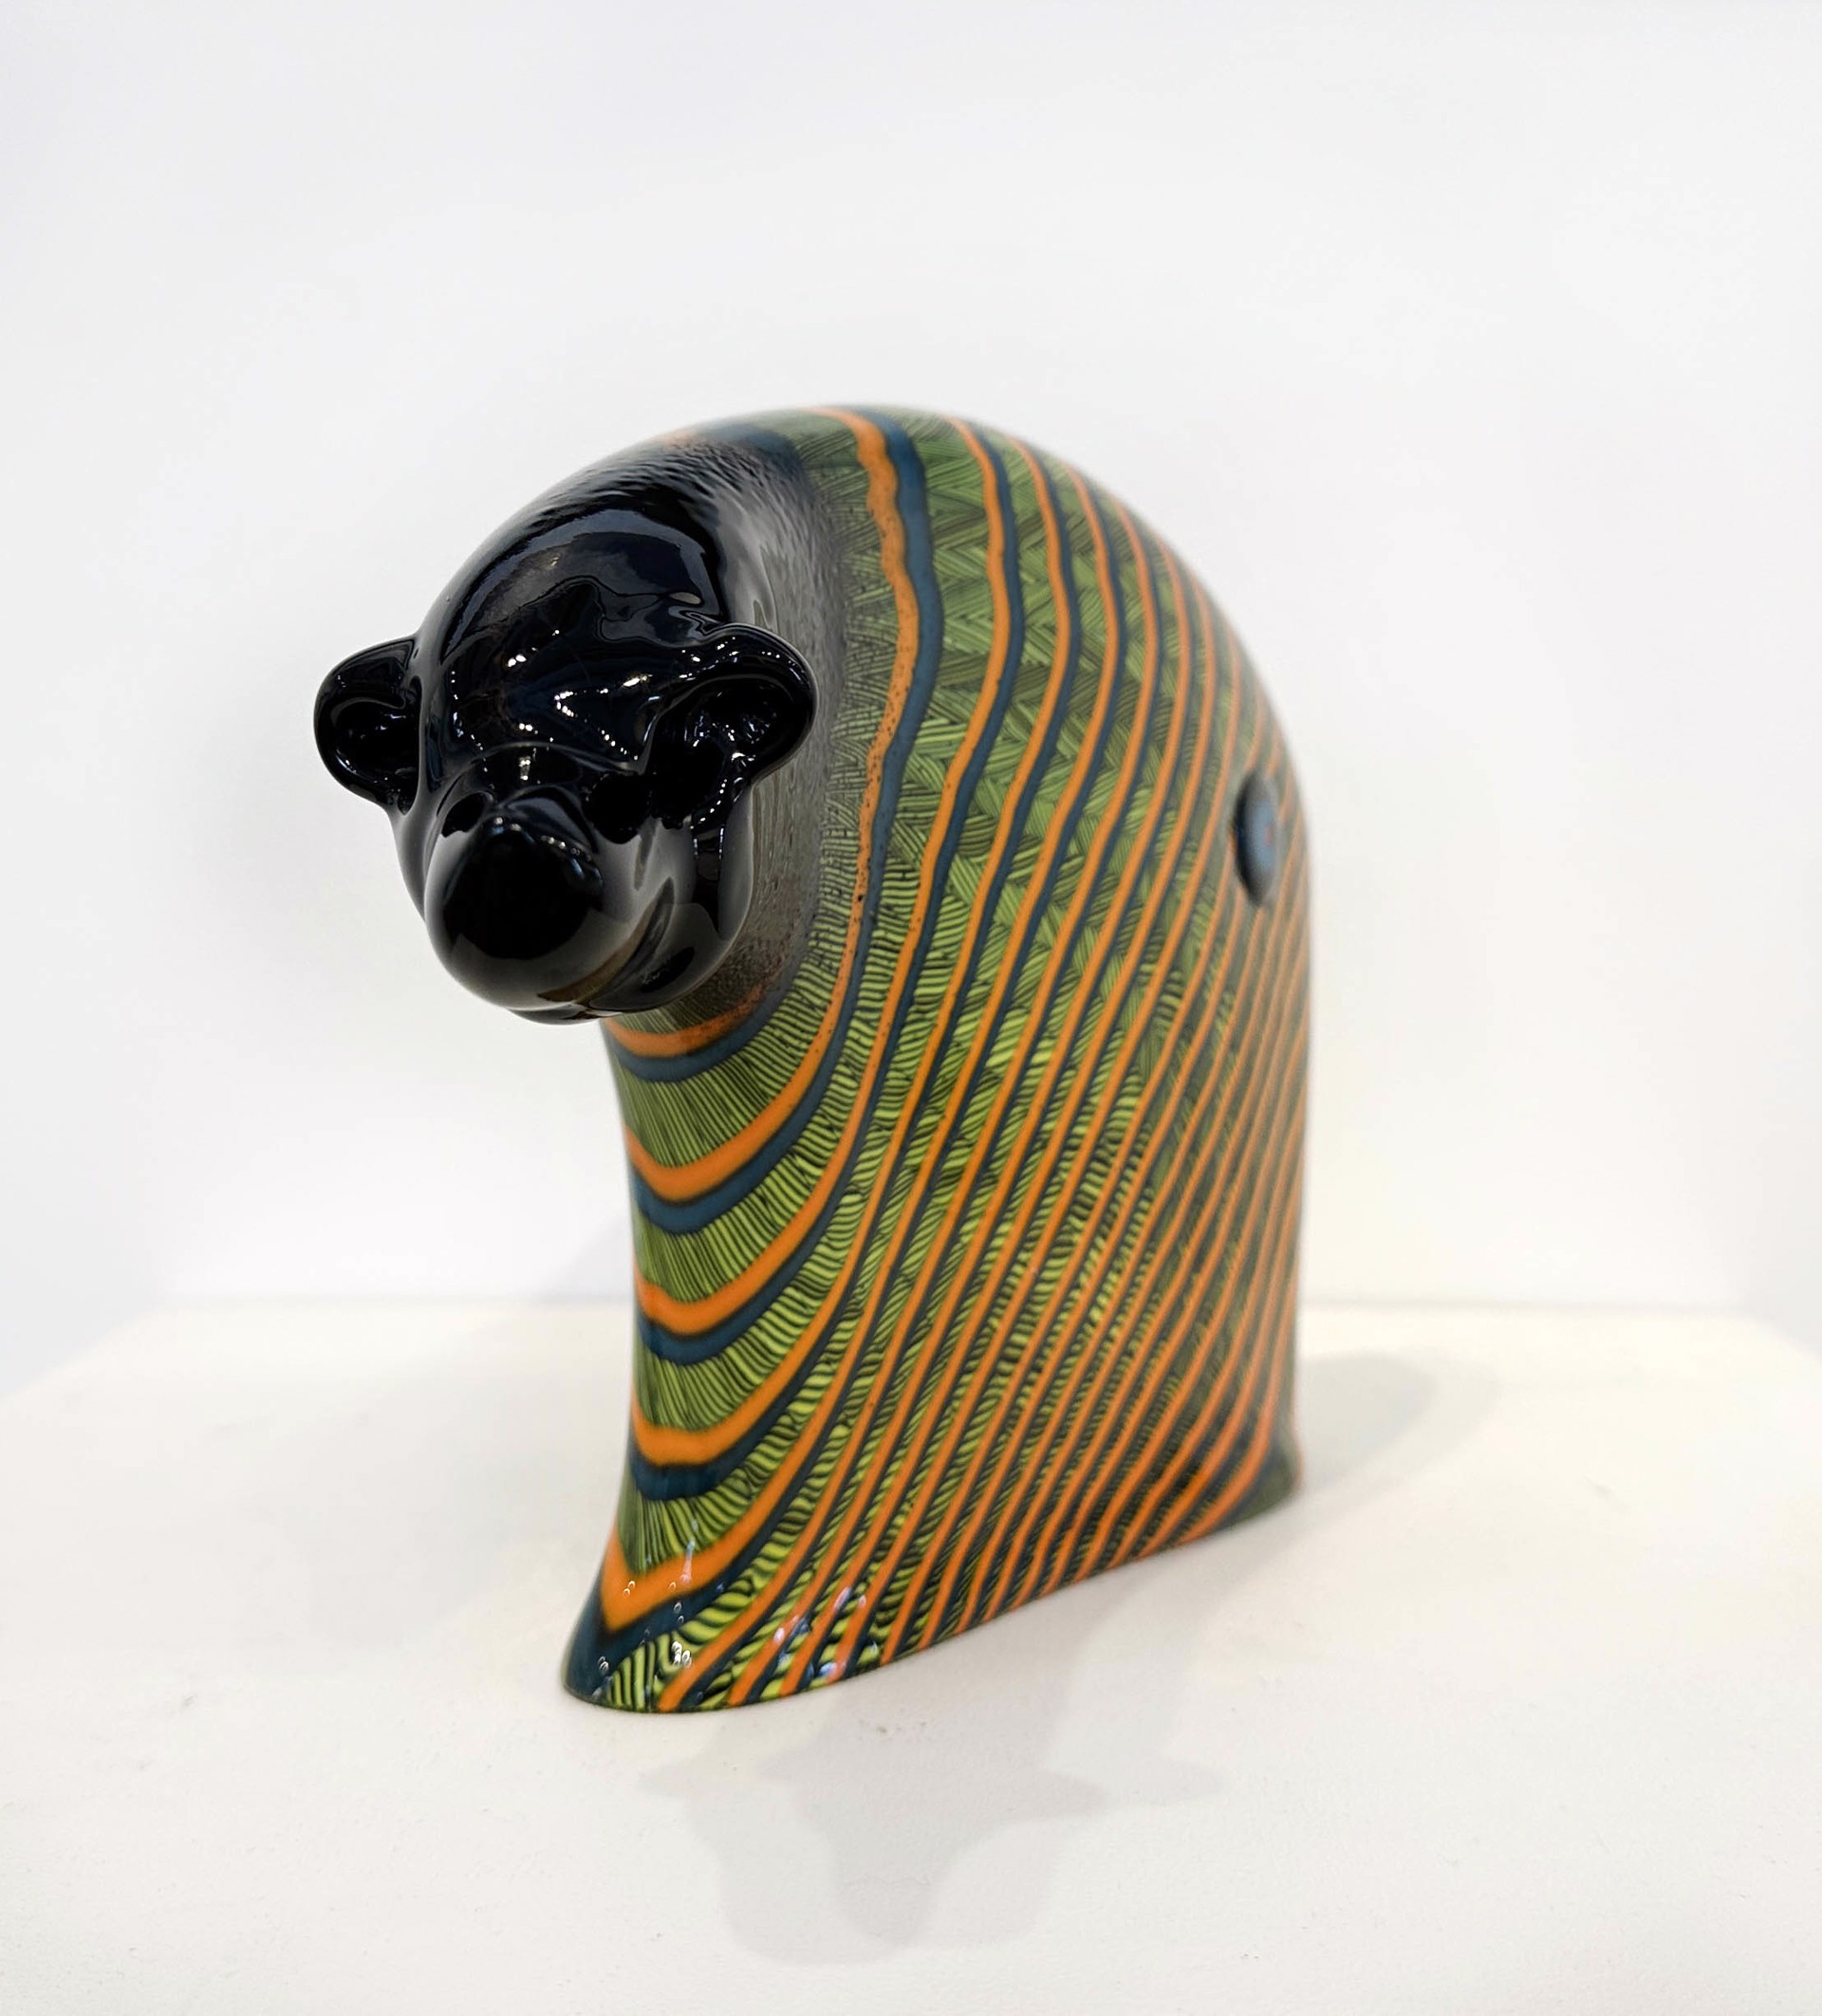 Original Hand Blown Glass Sculpture By Dan Friday Featuring A Simplified Bear Form With Orange And Green Lightning Pattern Motif Over Deep Glossy Black